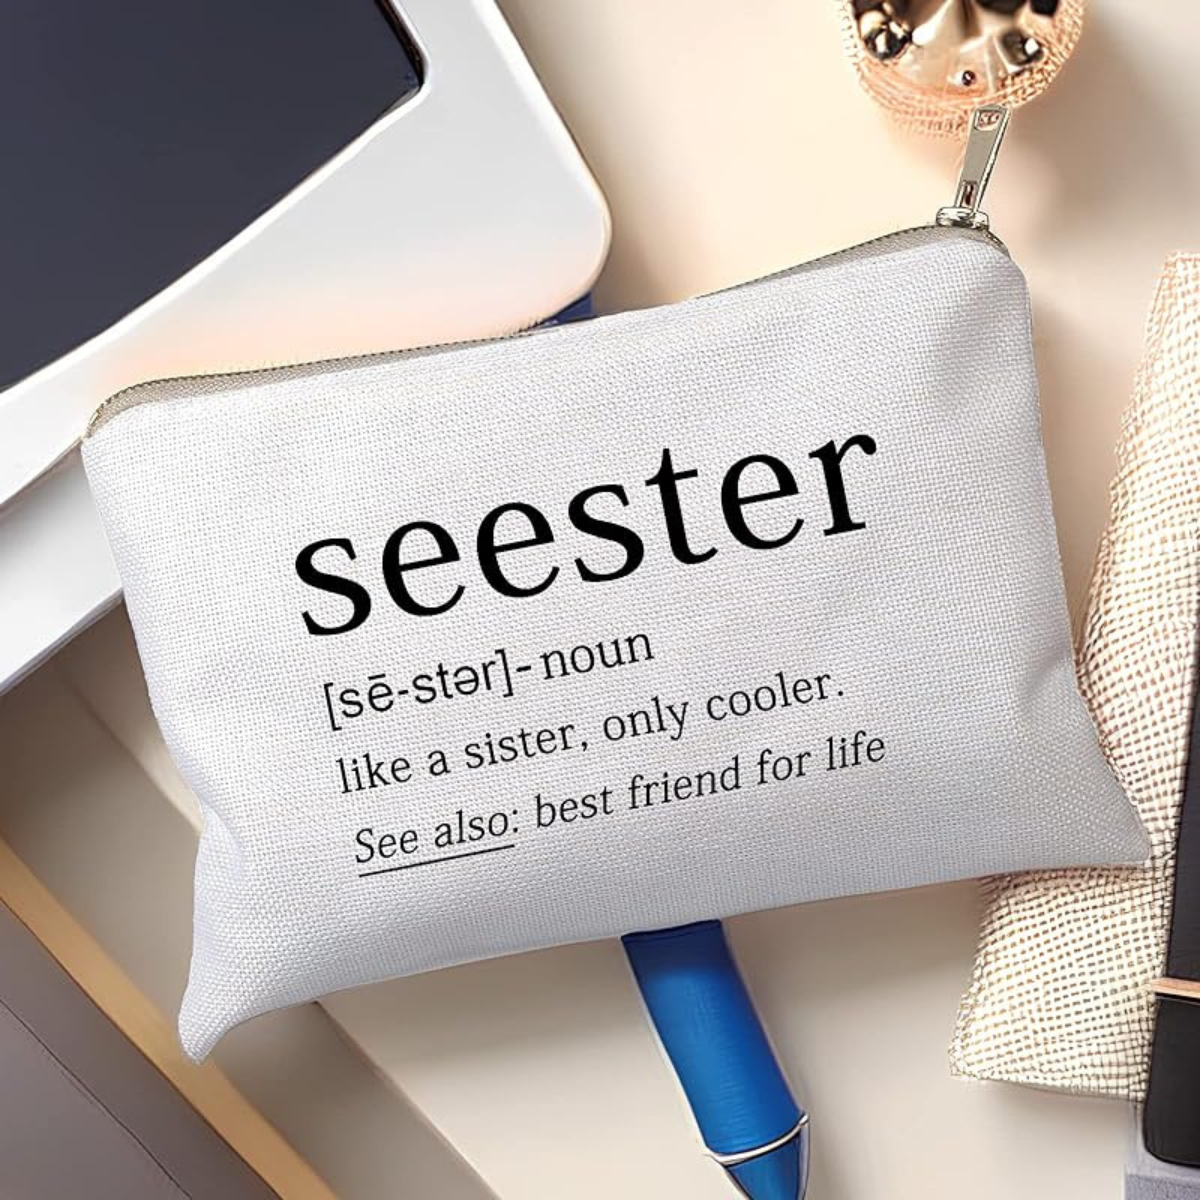 39 Small And Sentimental Gifts Perfect For Those You Love 